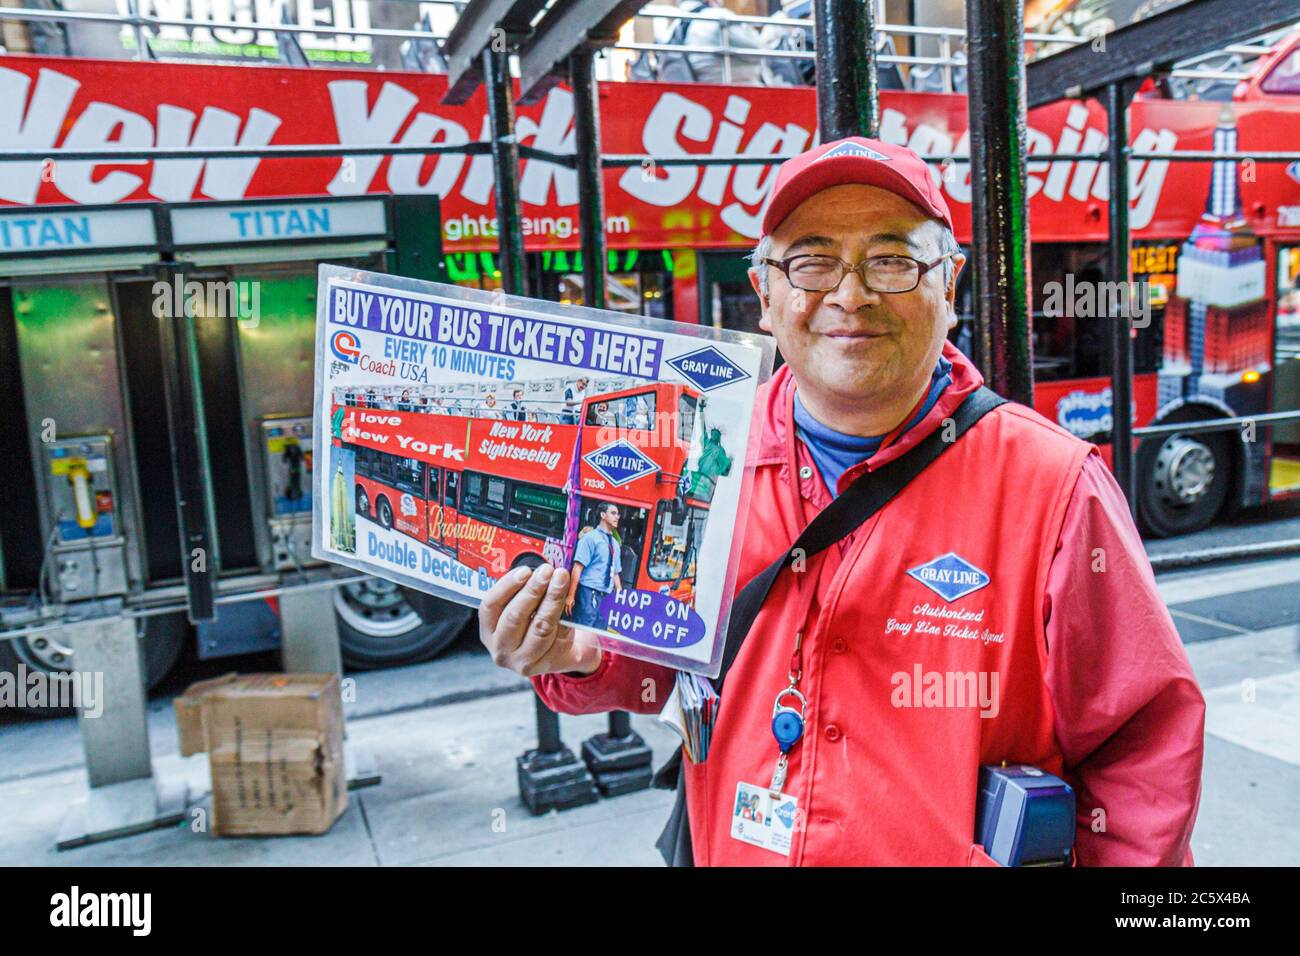 New York City,NYC NY Manhattan,Midtown,Times Square,Gray Line,double decker bus,coach,tour,driver,advertise,tickets,man men male adult adults,mature,v Stock Photo